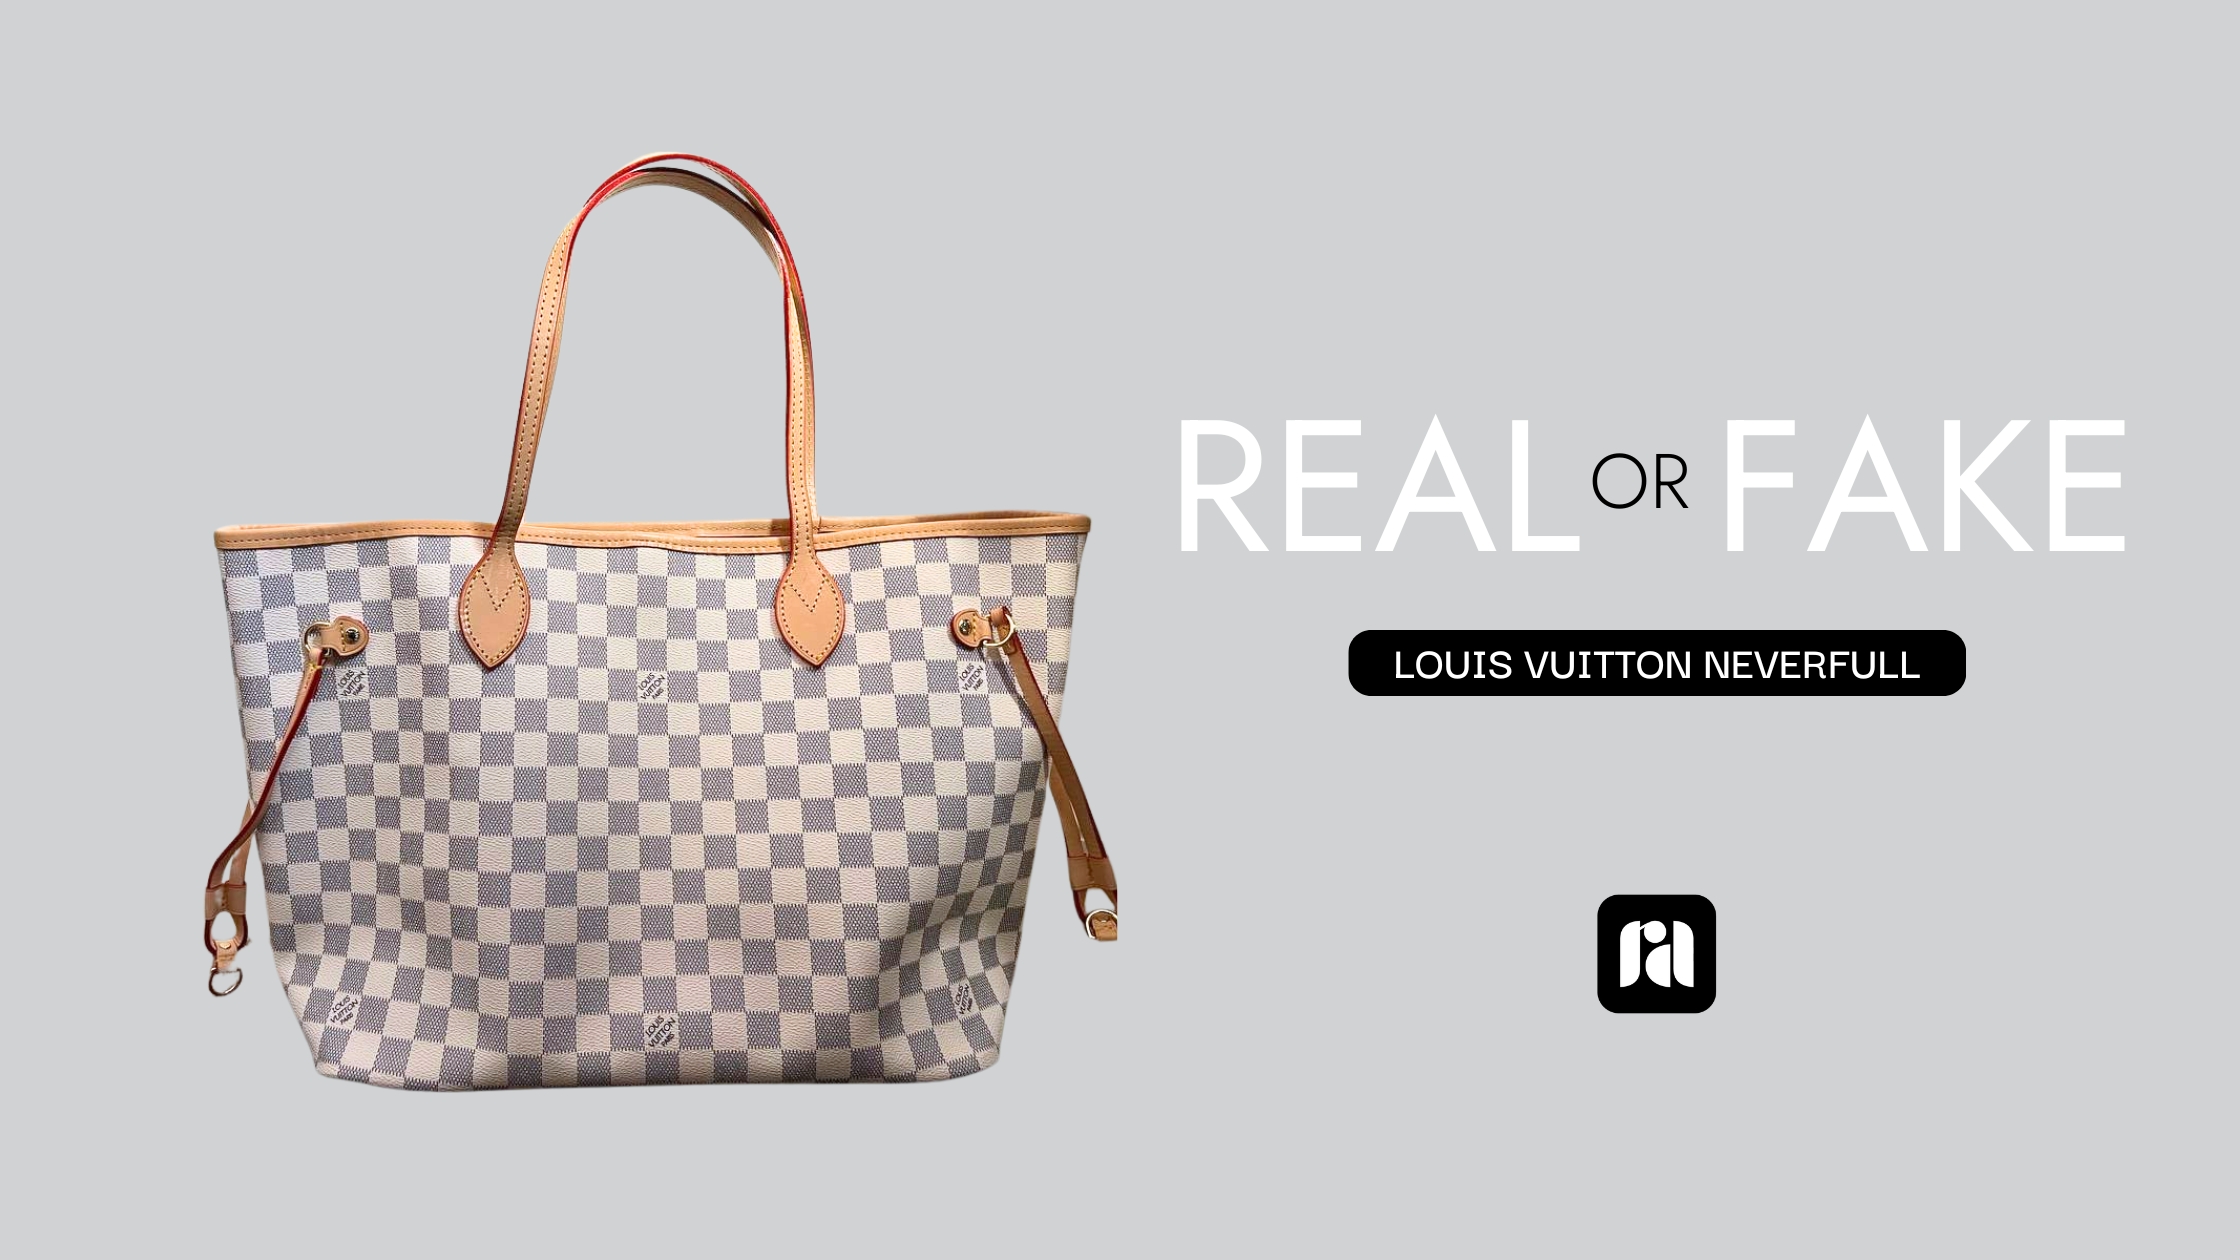 Real or Fake: The Louis Vuitton Neverfull